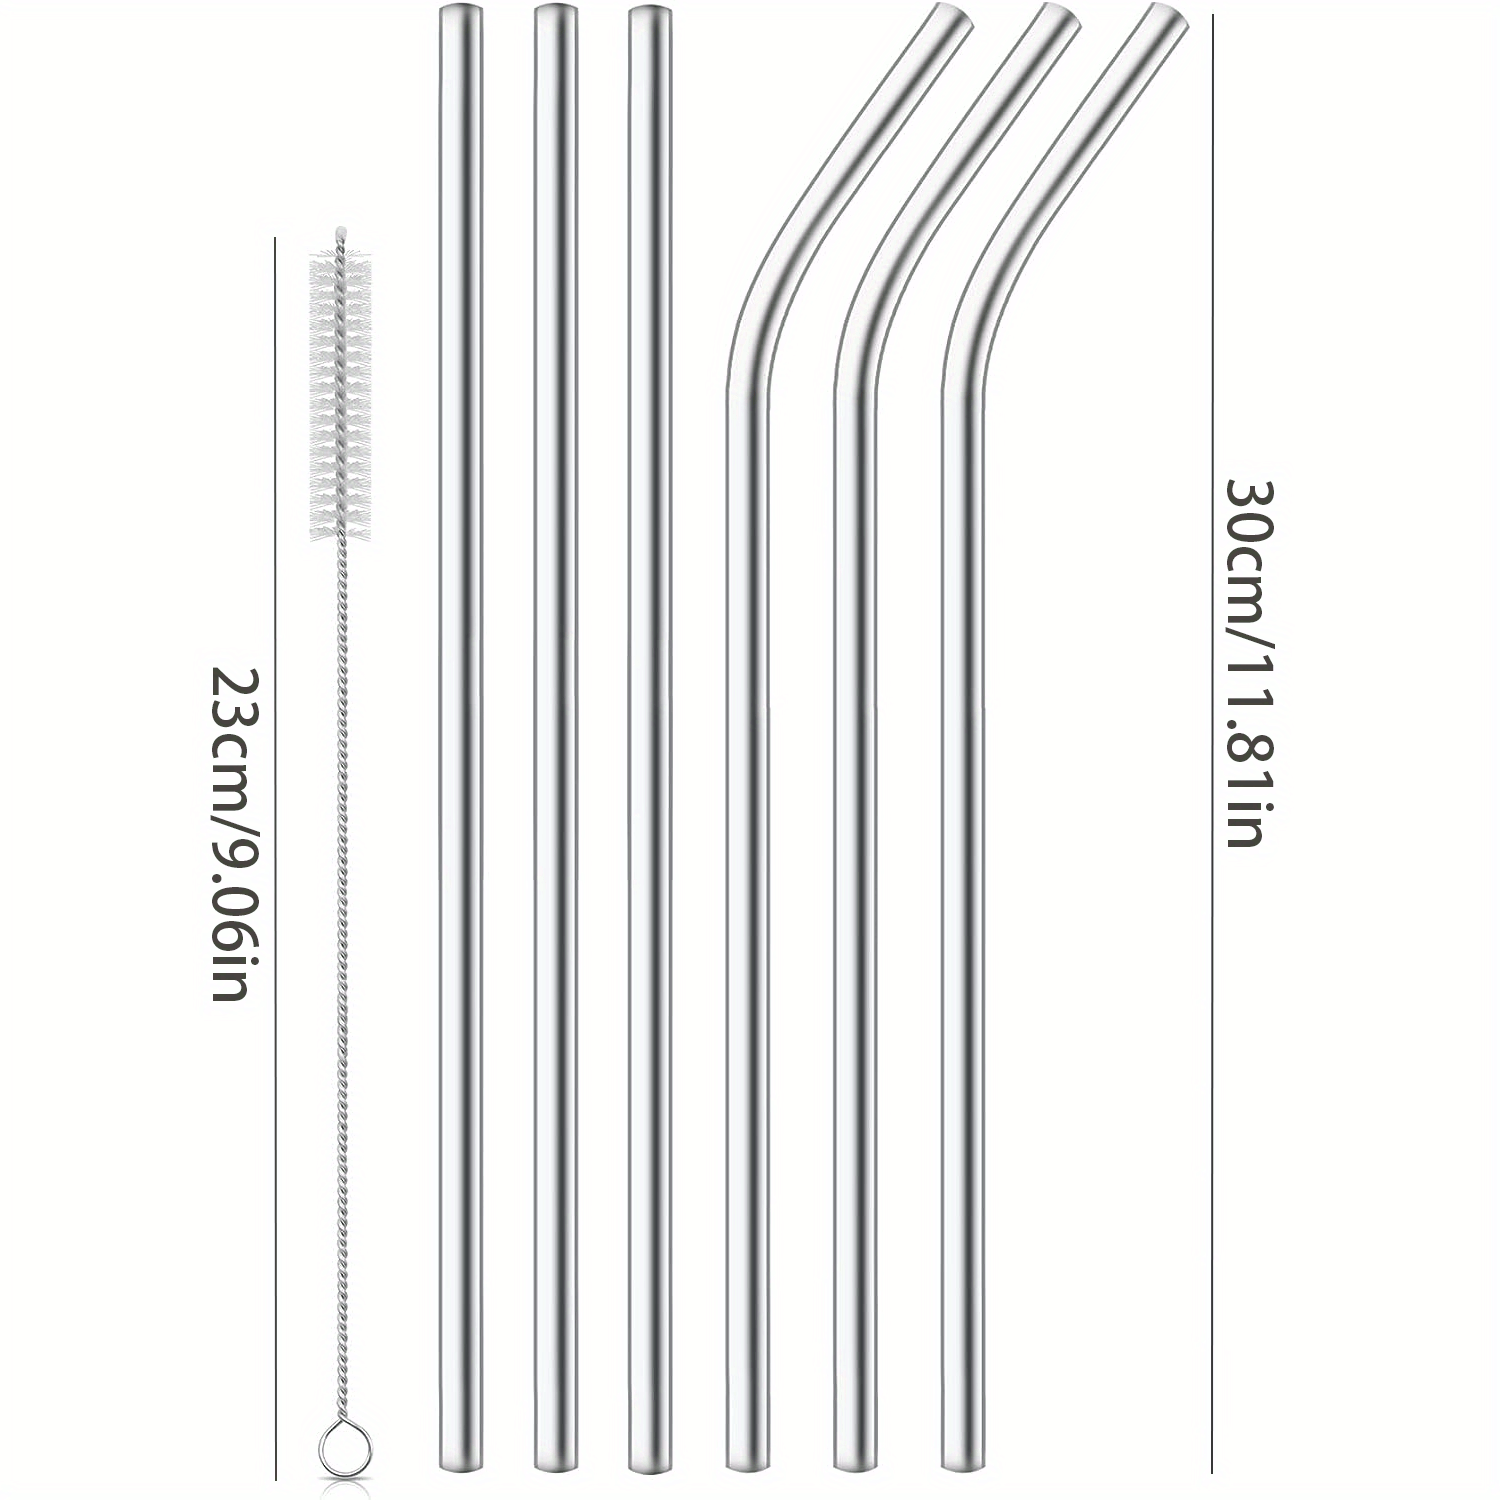 Stainless Steel Replacement Straws for Stanley Adventure Travel